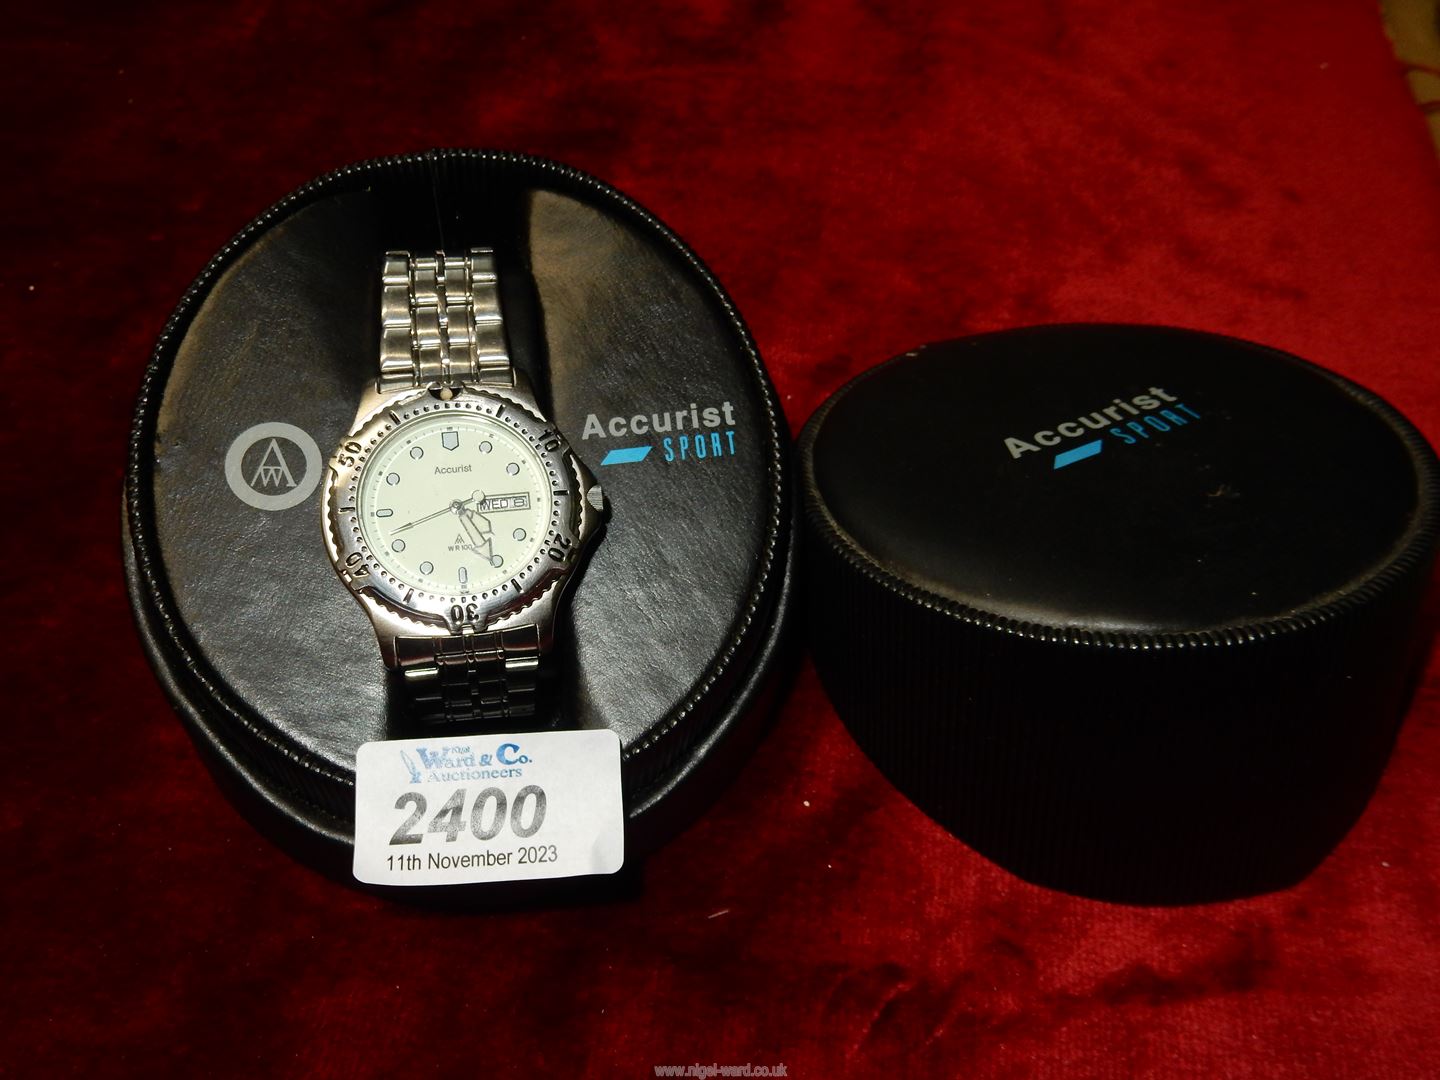 A cased Accurist Sport stainless steel gents wristwatch with instructions, guarantee pack etc.